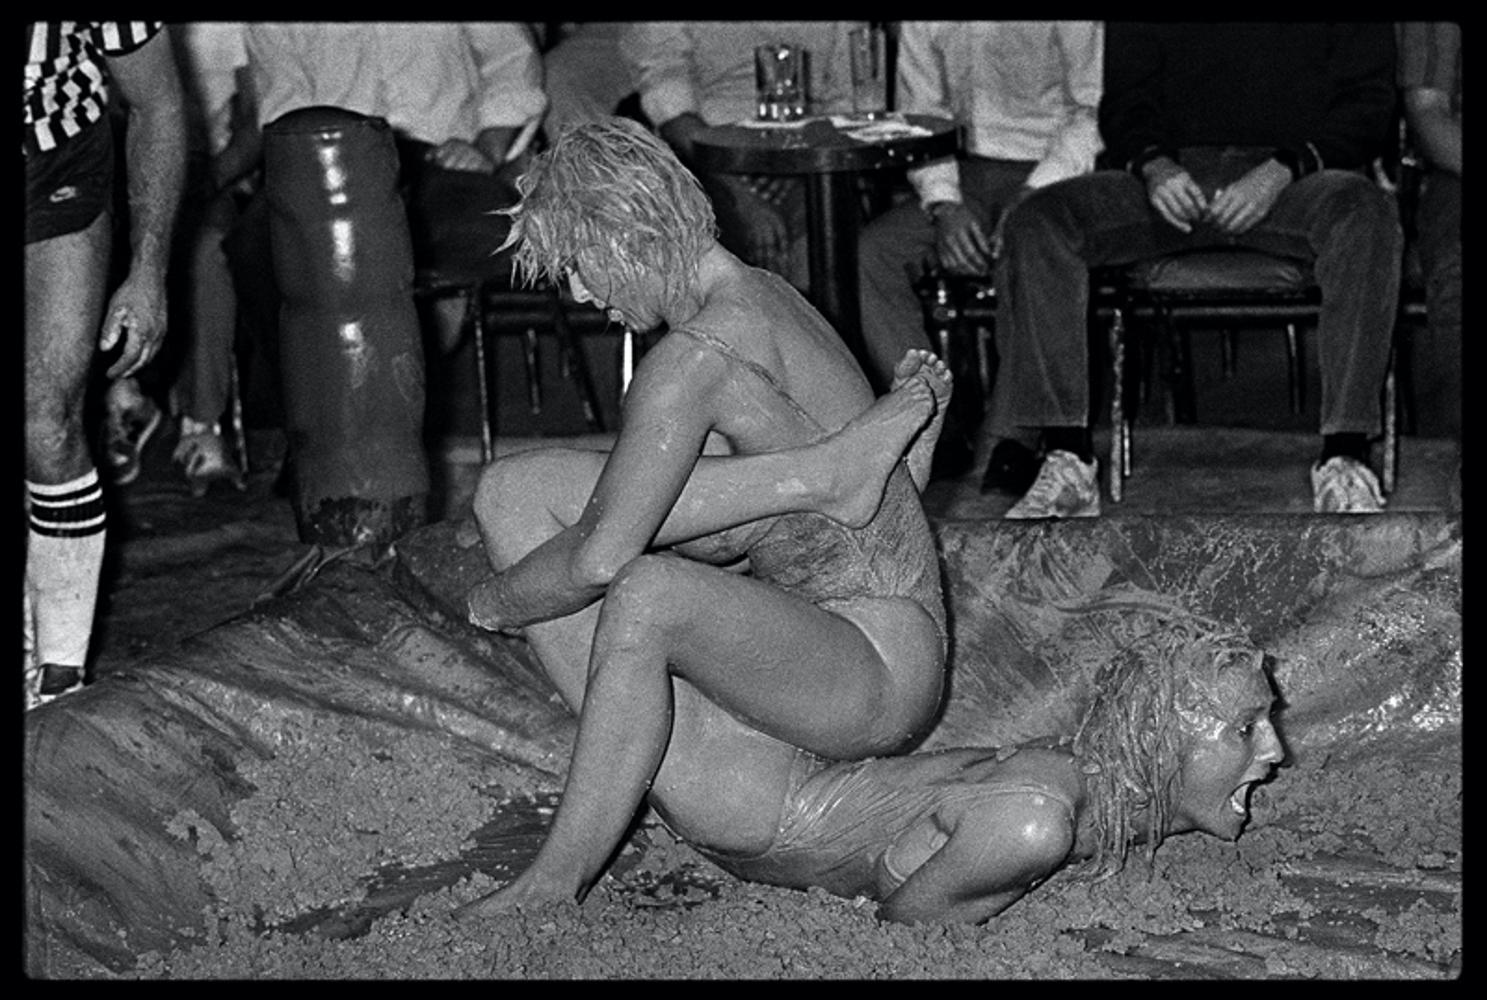 Catfight III
by Arthur Steel

Catfight – Female Bikini Mud Wrestlers, Hollywood Tropicana, Los Angeles 1985 – Set of 6 prints.

Arthur recalls:
“I was in Los Angeles with the British cricketer Ian Botham, as he was hoping to forge a career as a